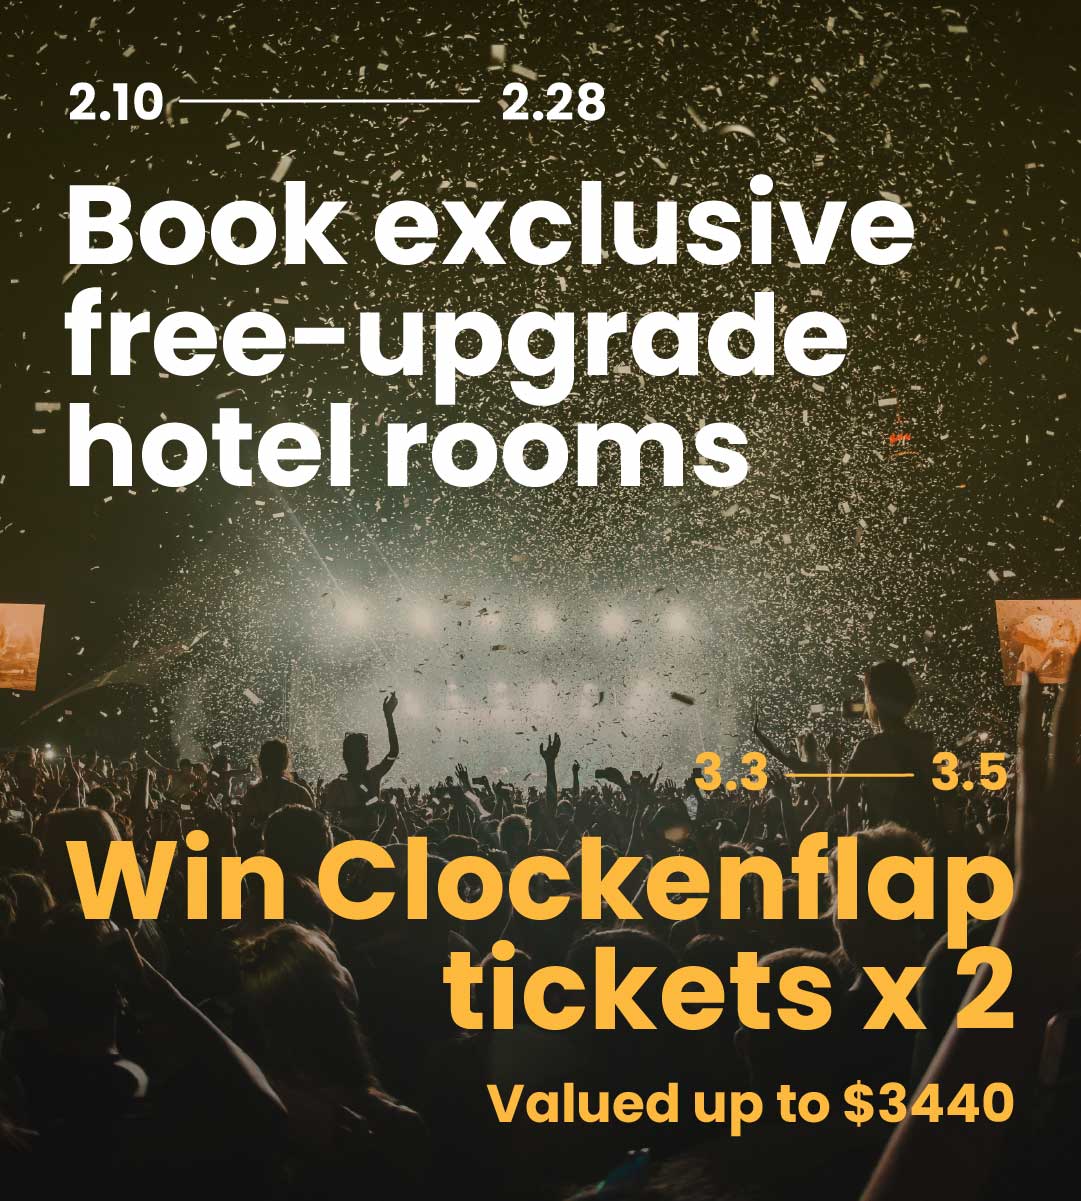 Valentine's Day Offer: Win Clockenflap tickets with Free-Upgrade Hotel Bookings